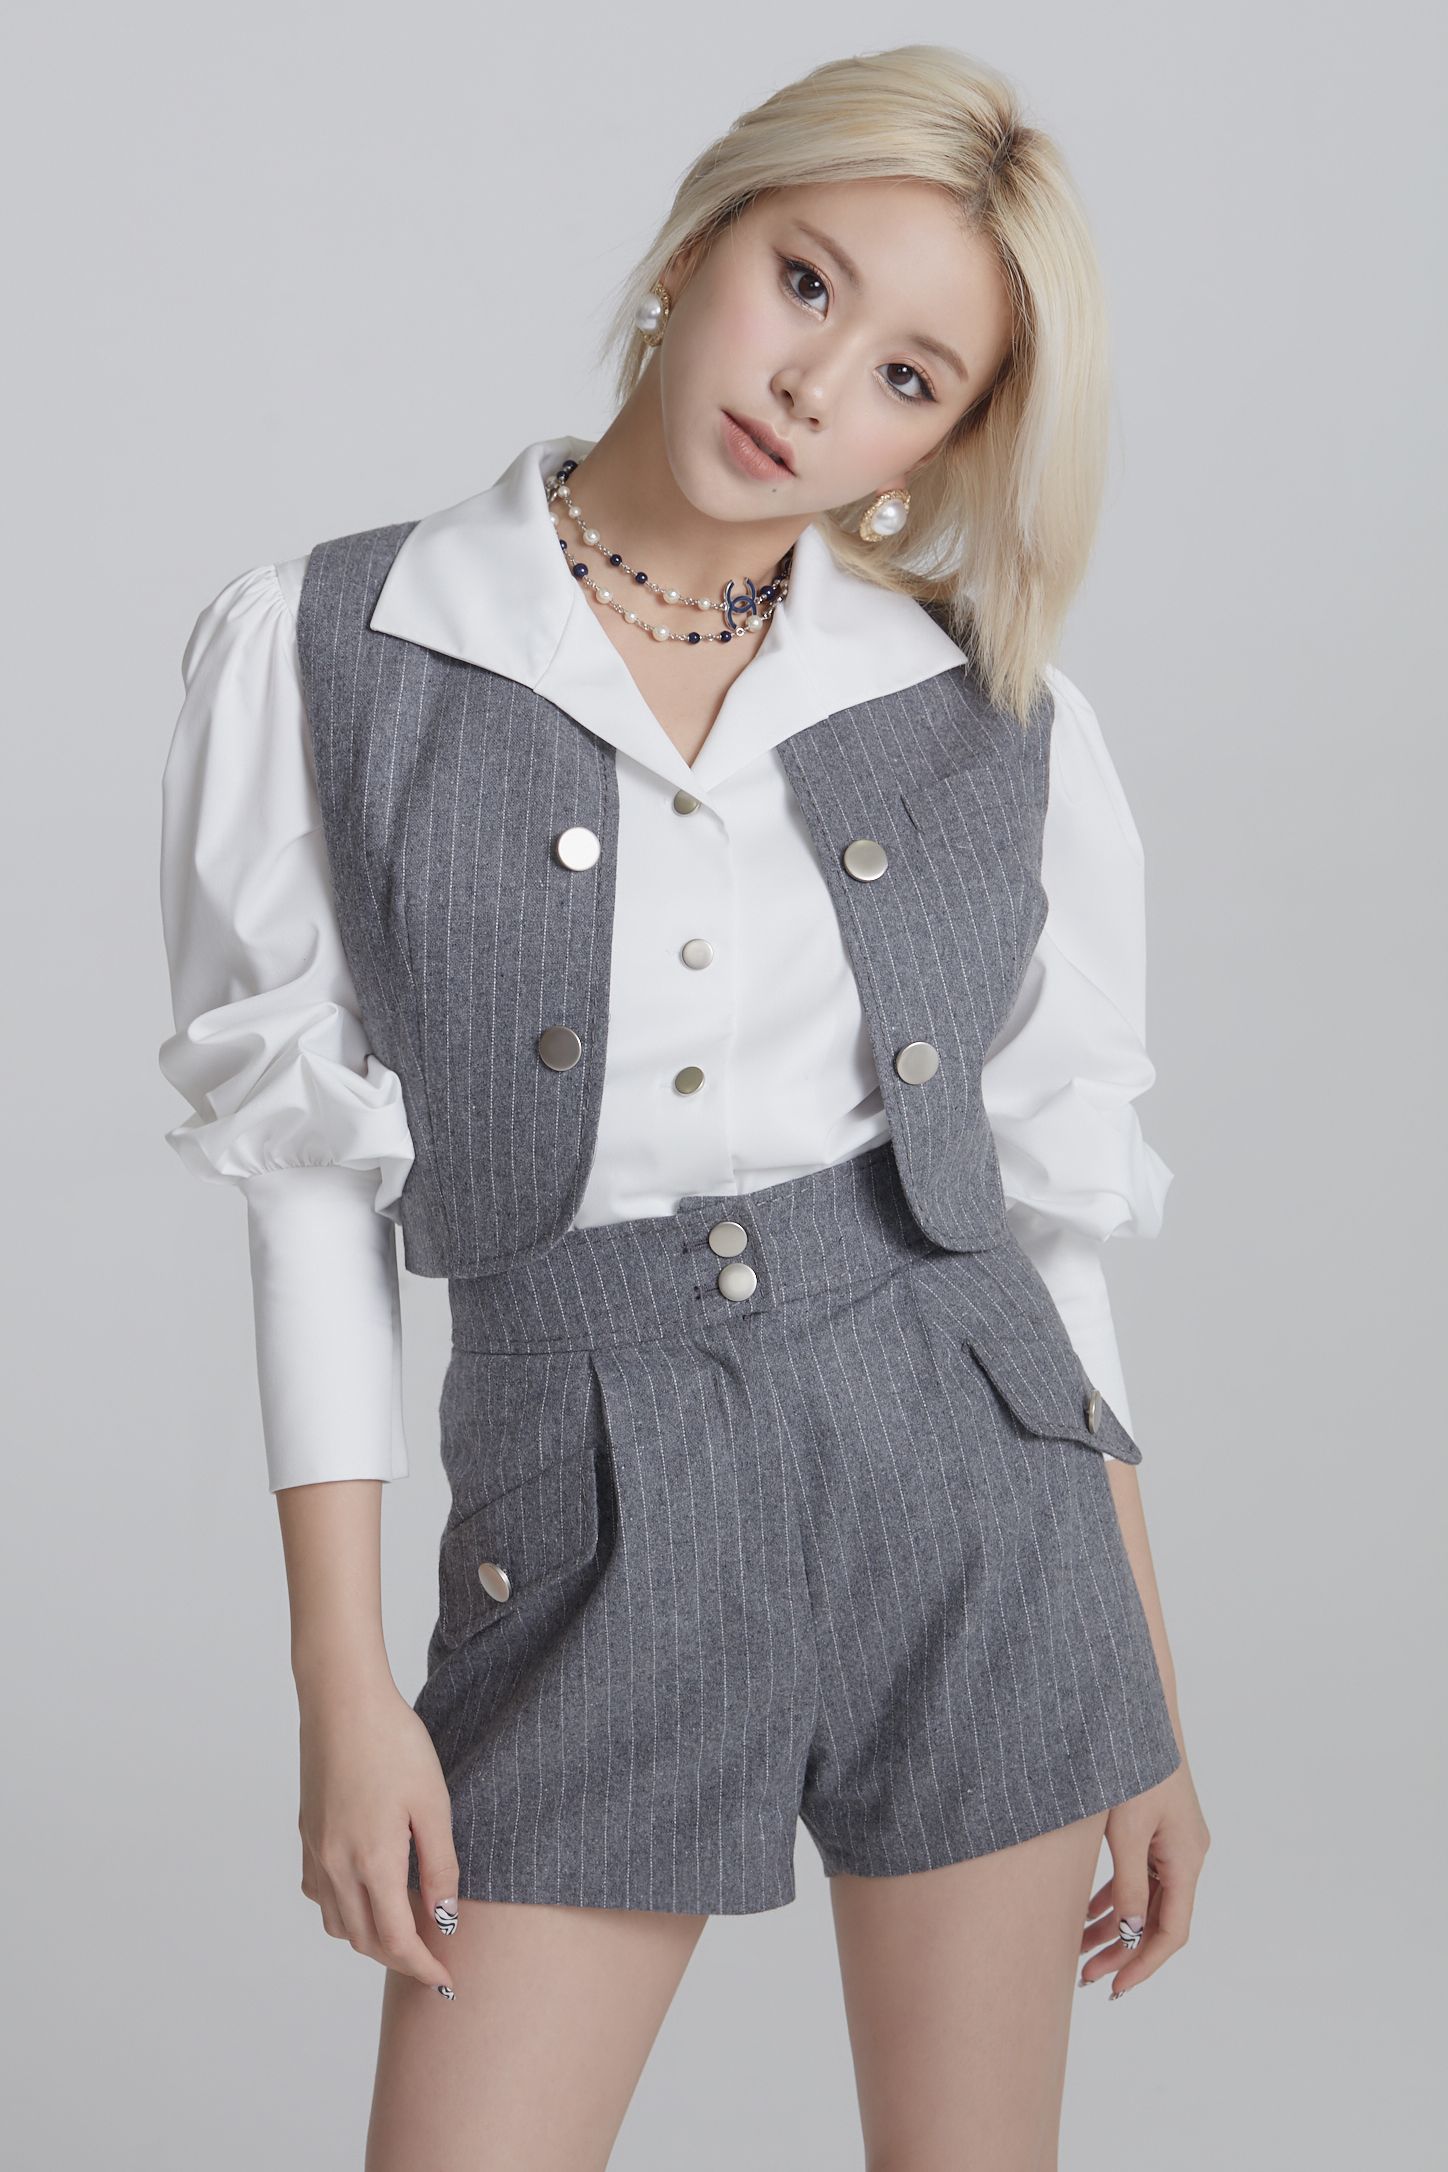 jyp entertainmenttwice, chaeyoung